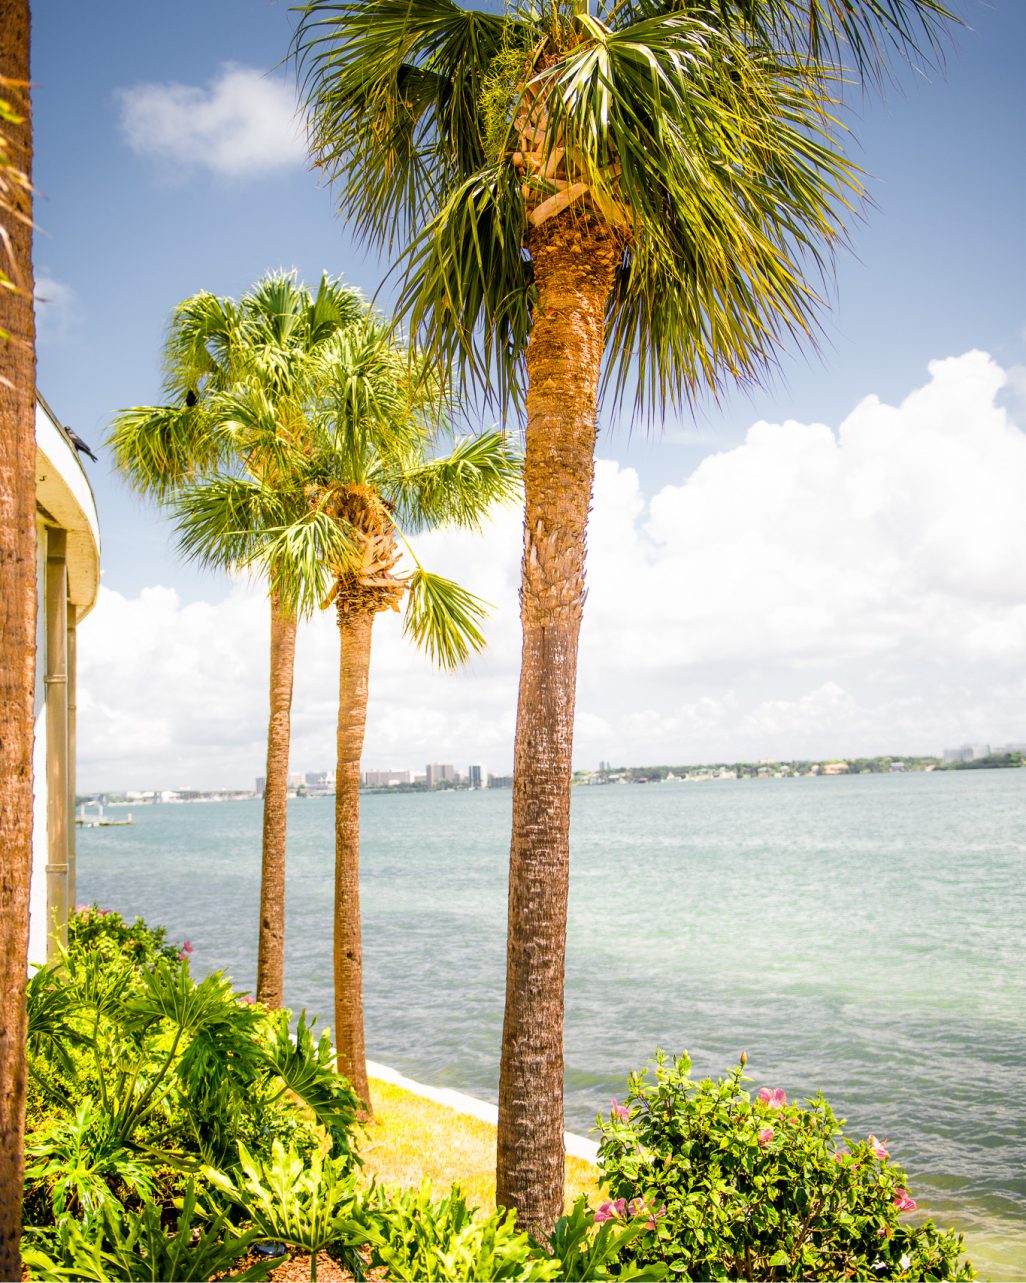 Palm trees in Sandkey in Clearwater, Florida.